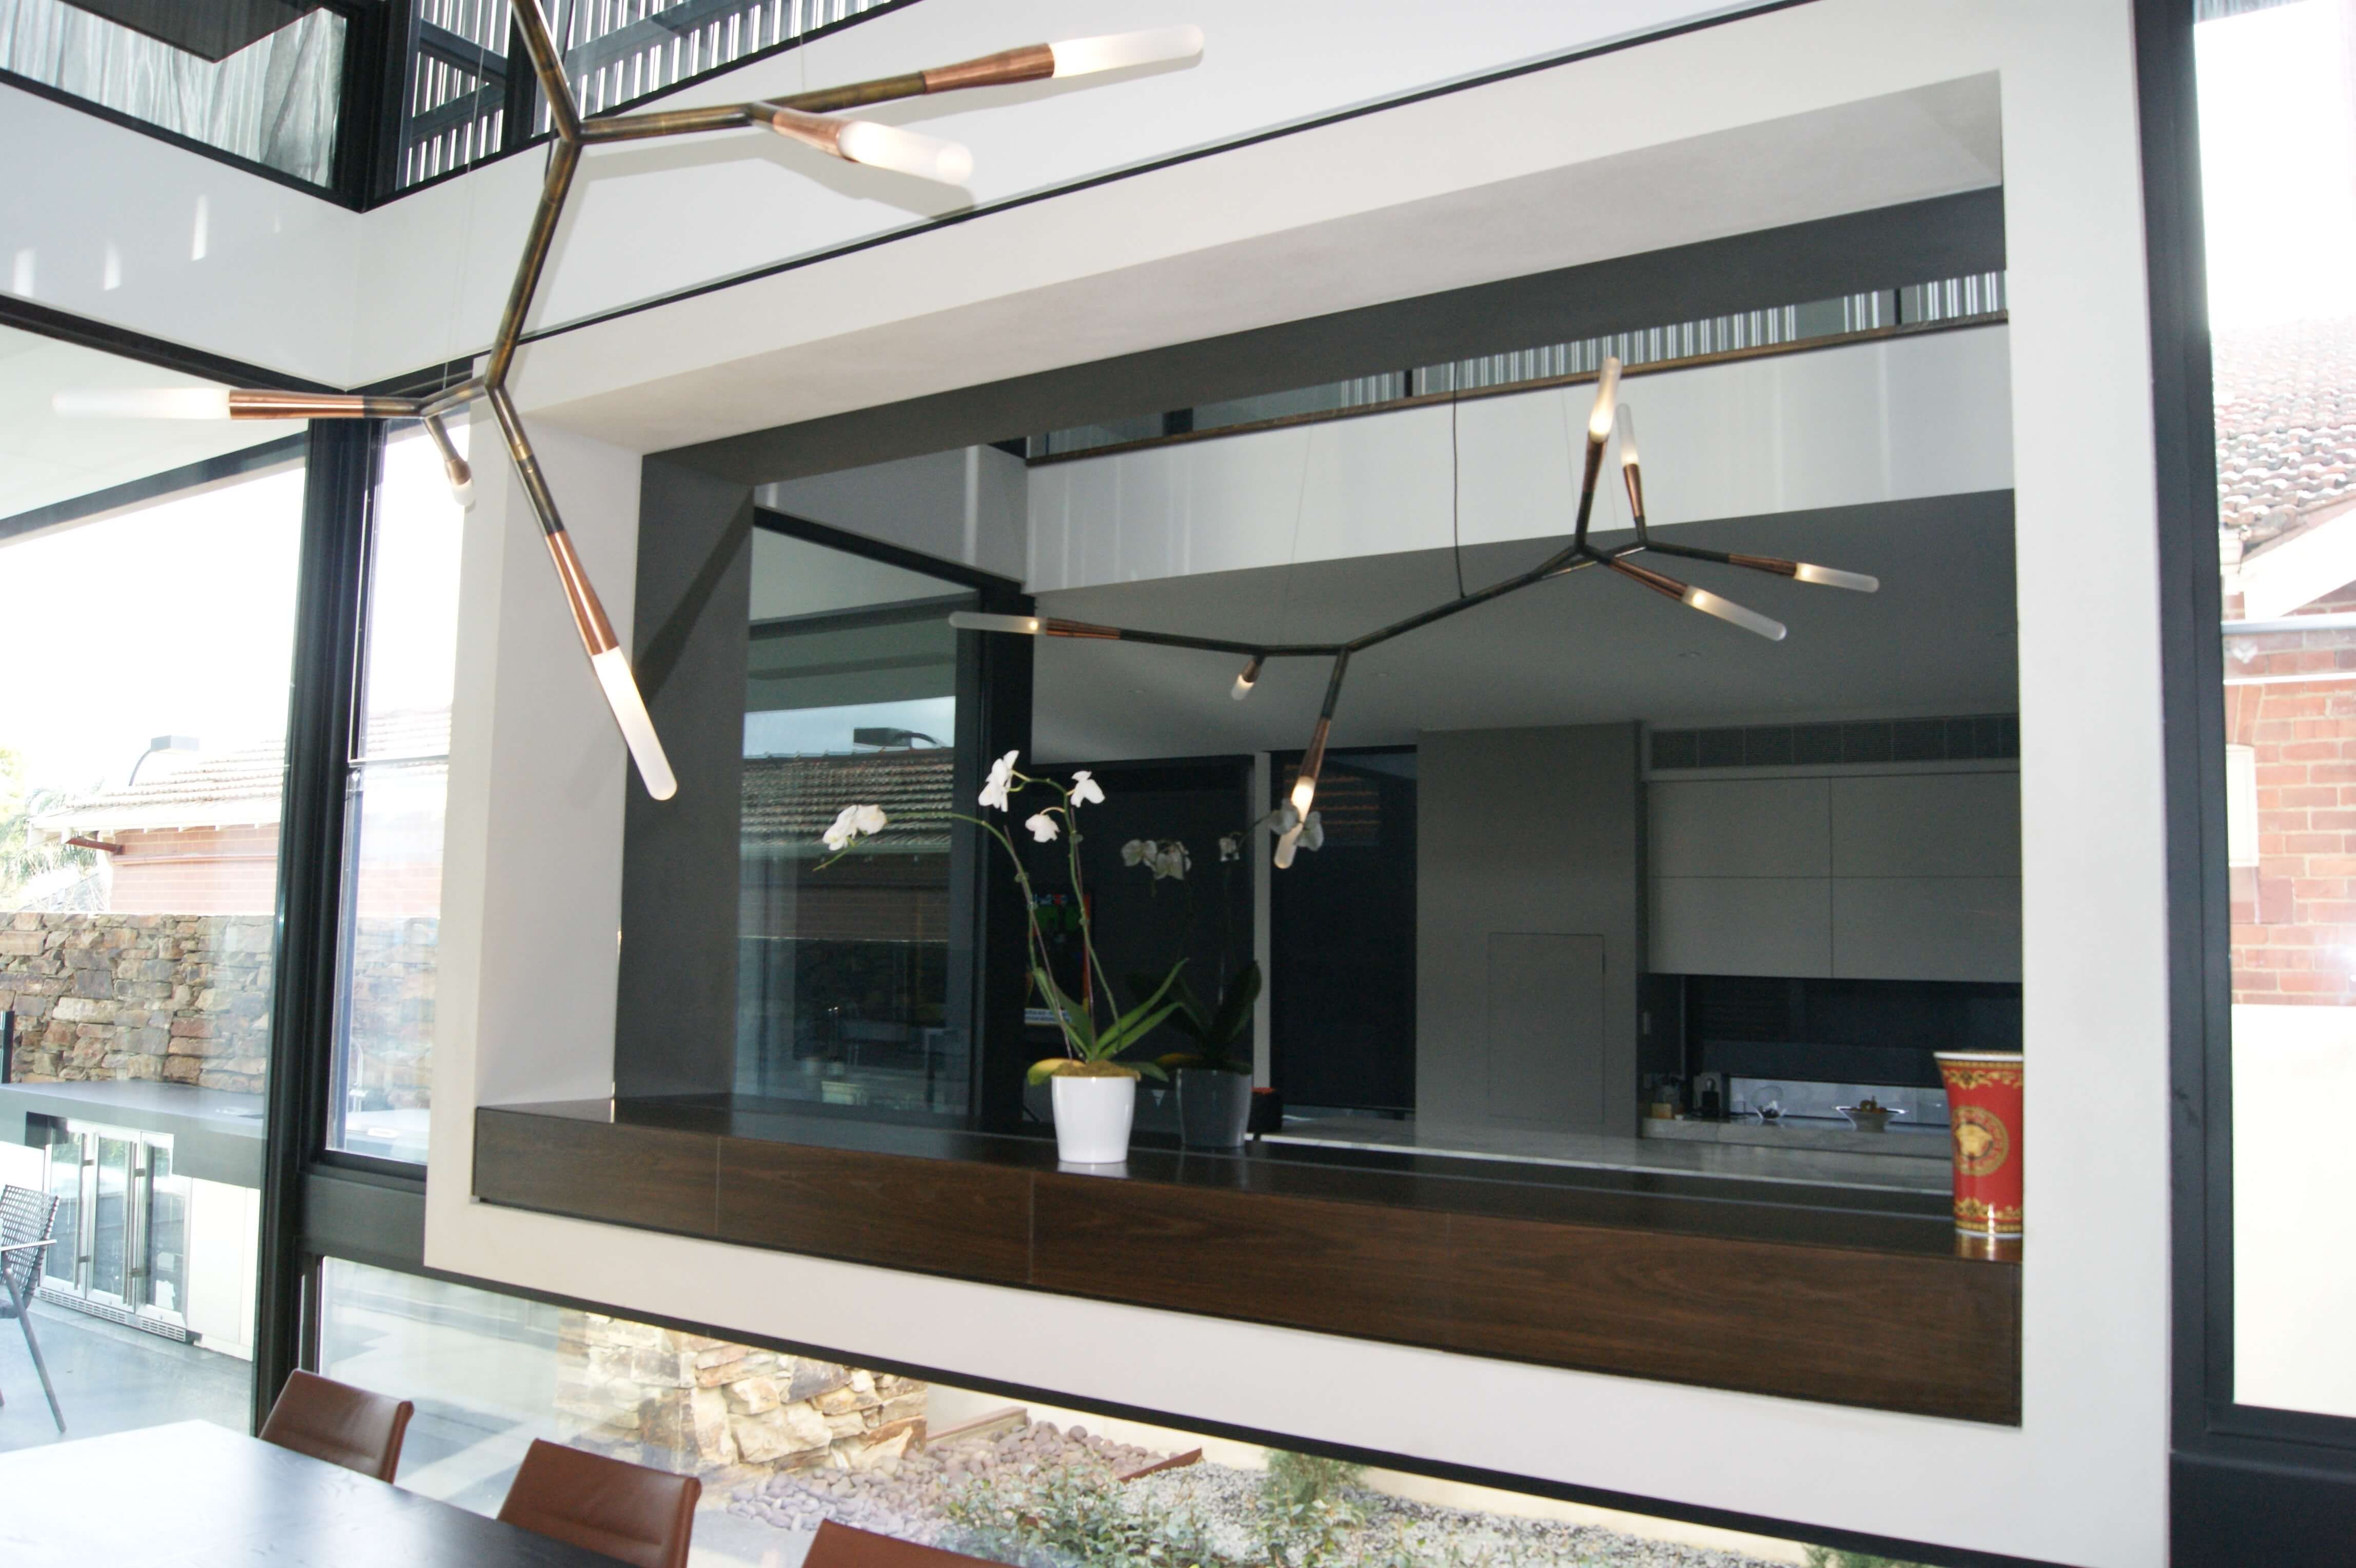 Wall Mirrors Melbourne Design Inferno Glass Throughout Feature Wall Mirror (View 11 of 15)